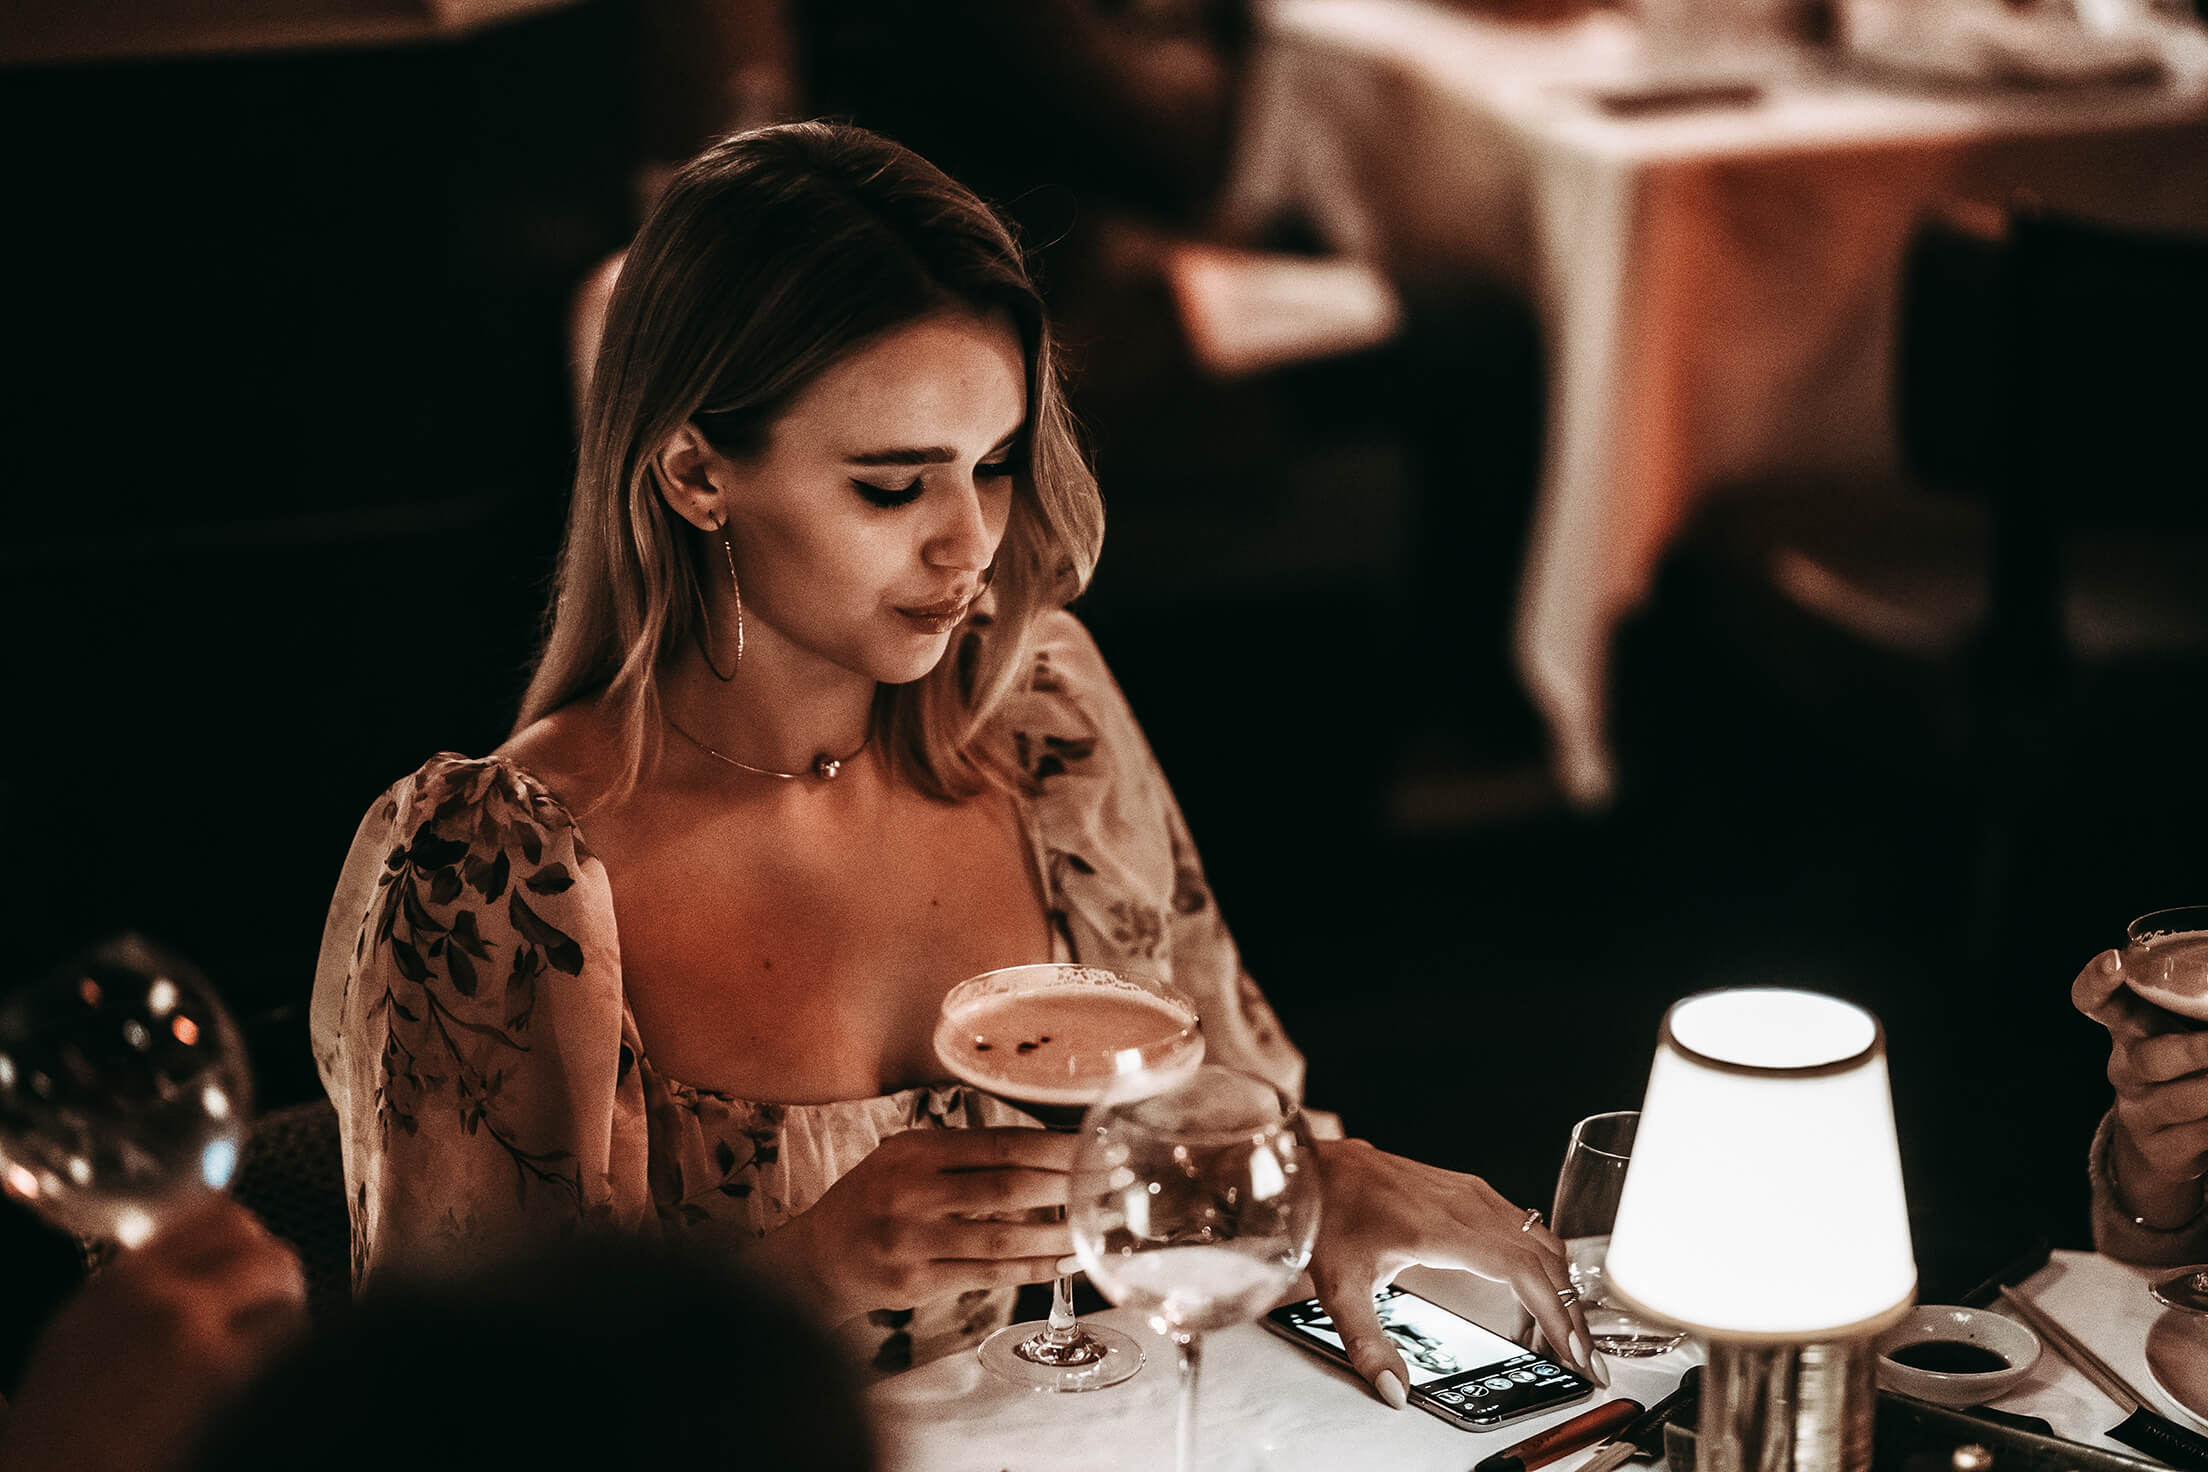 Woman with a drink and phone